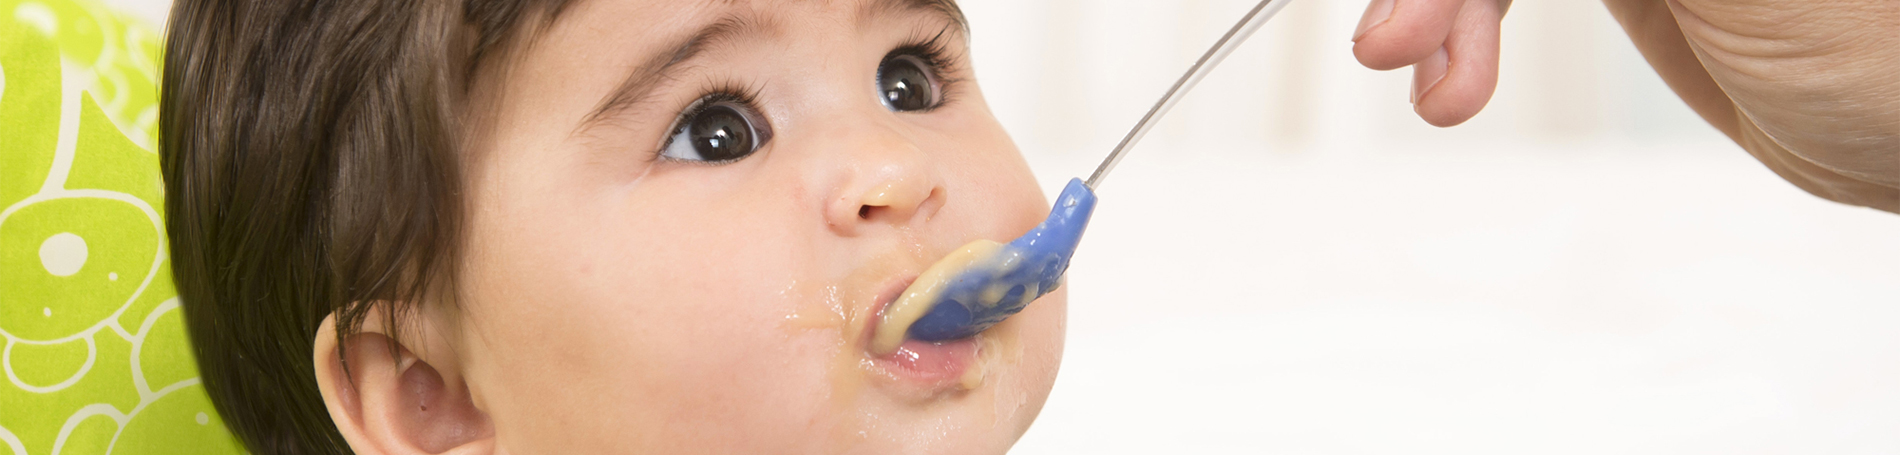 Indian baby being spoon fed a fruit puree